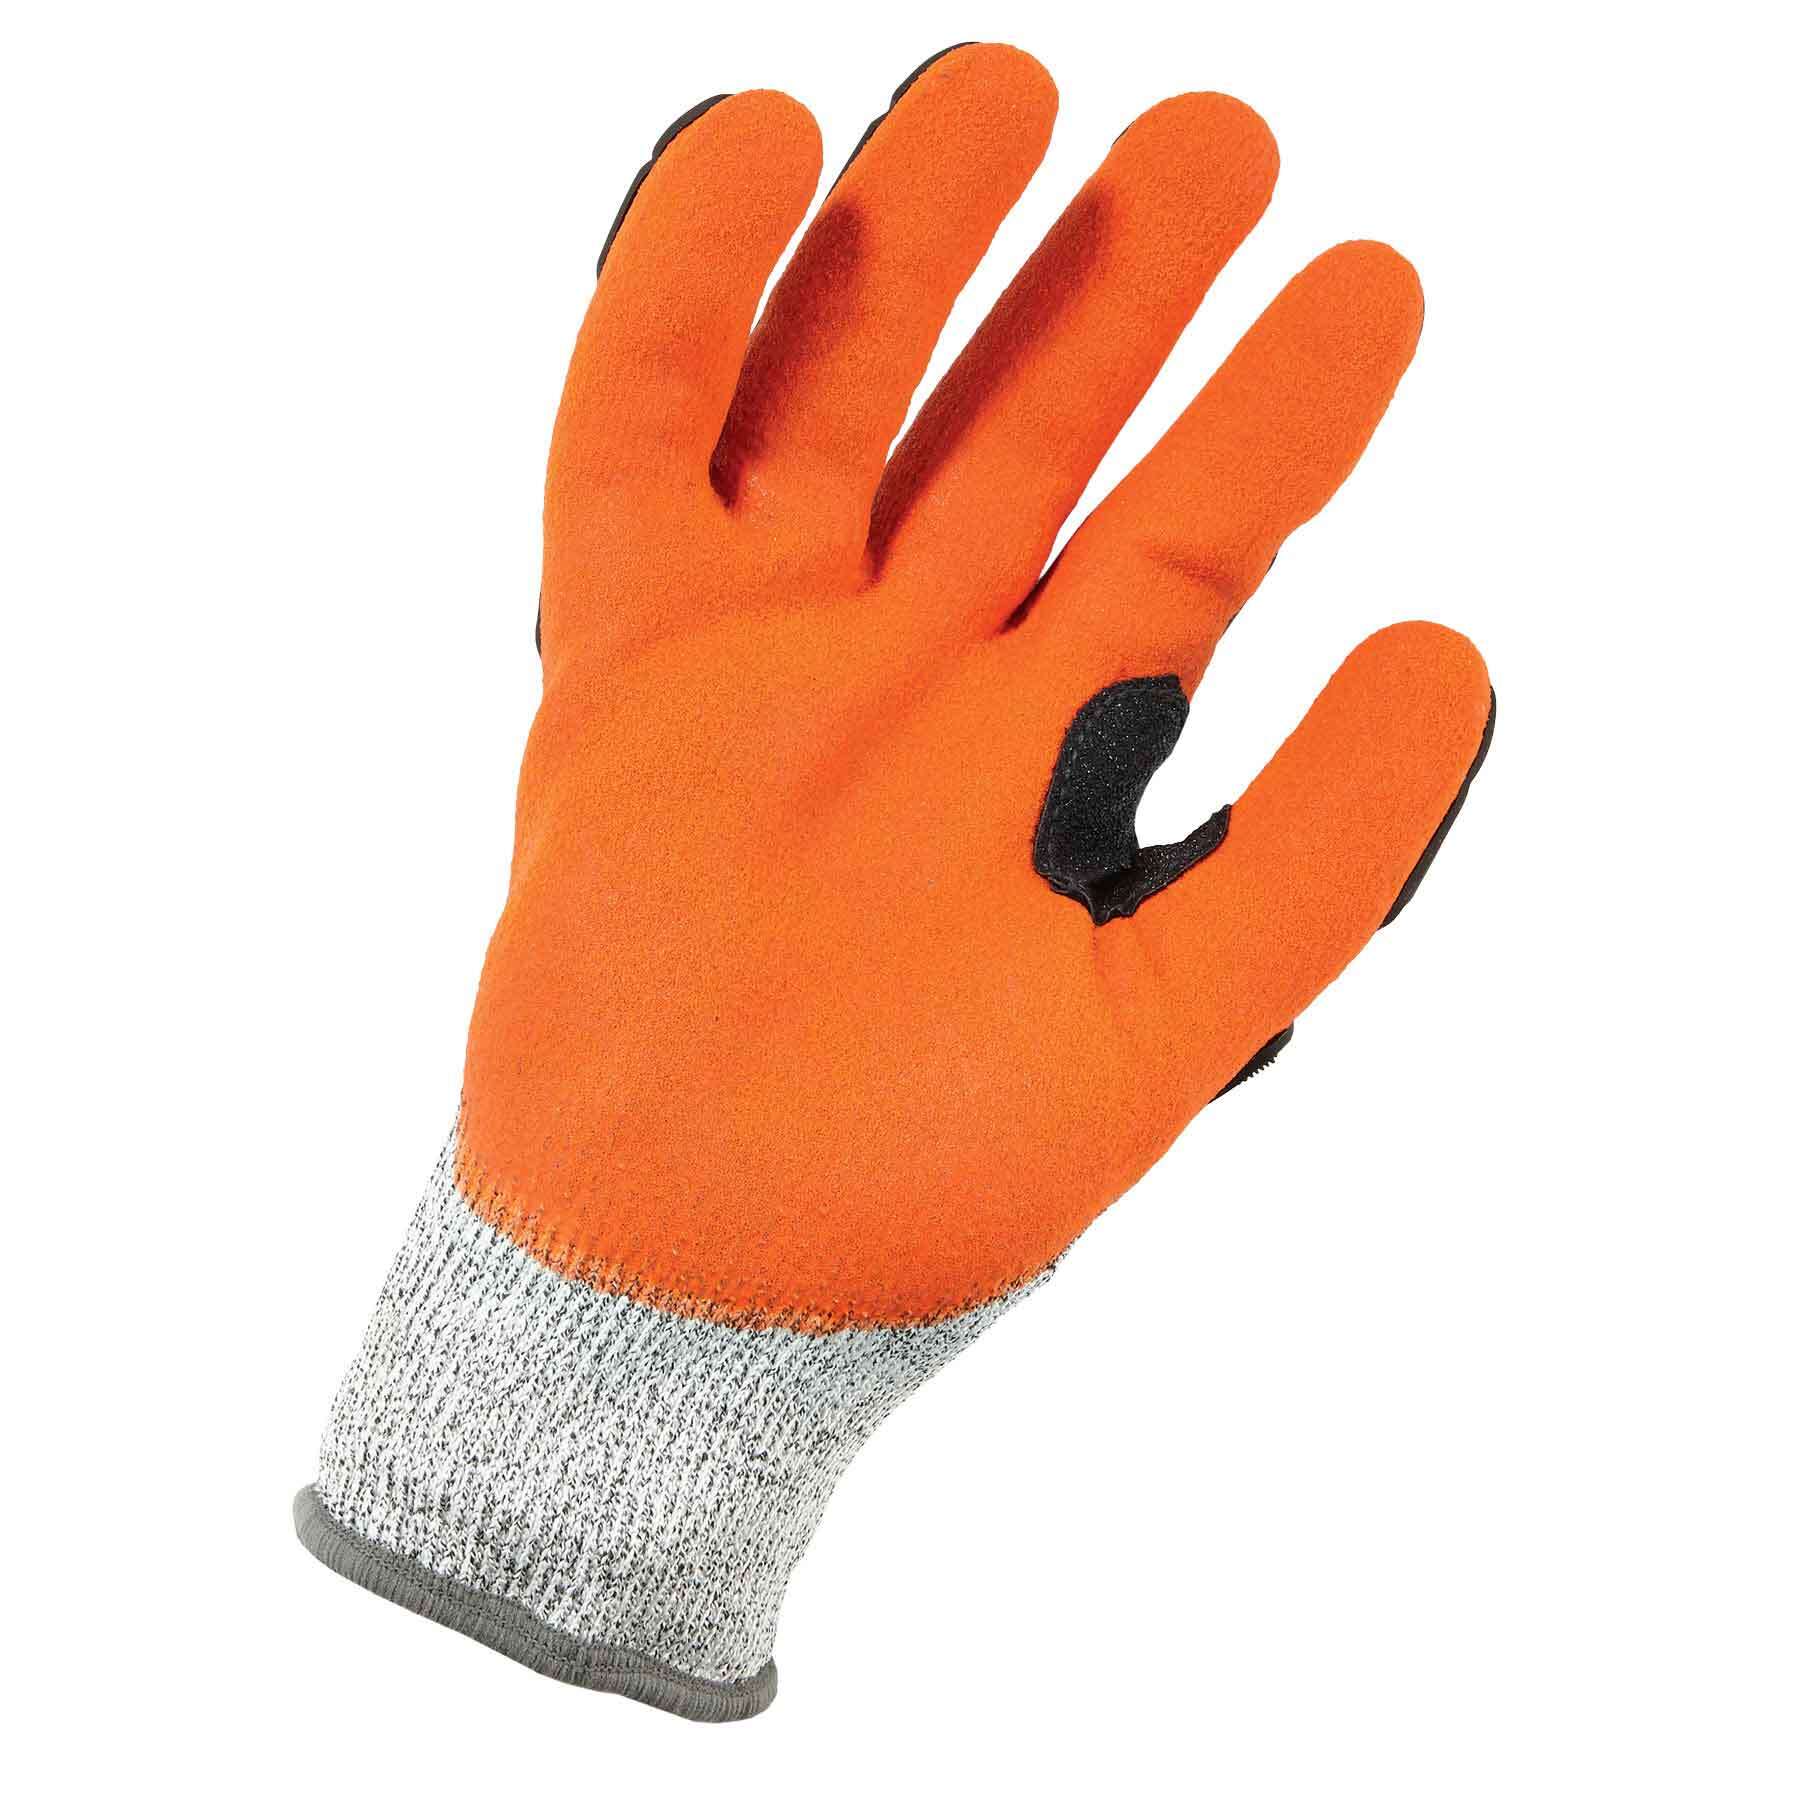 4 Pairs Safety Work Gloves Dotted Nitrile Coated Palm Industrial Performance L AB226